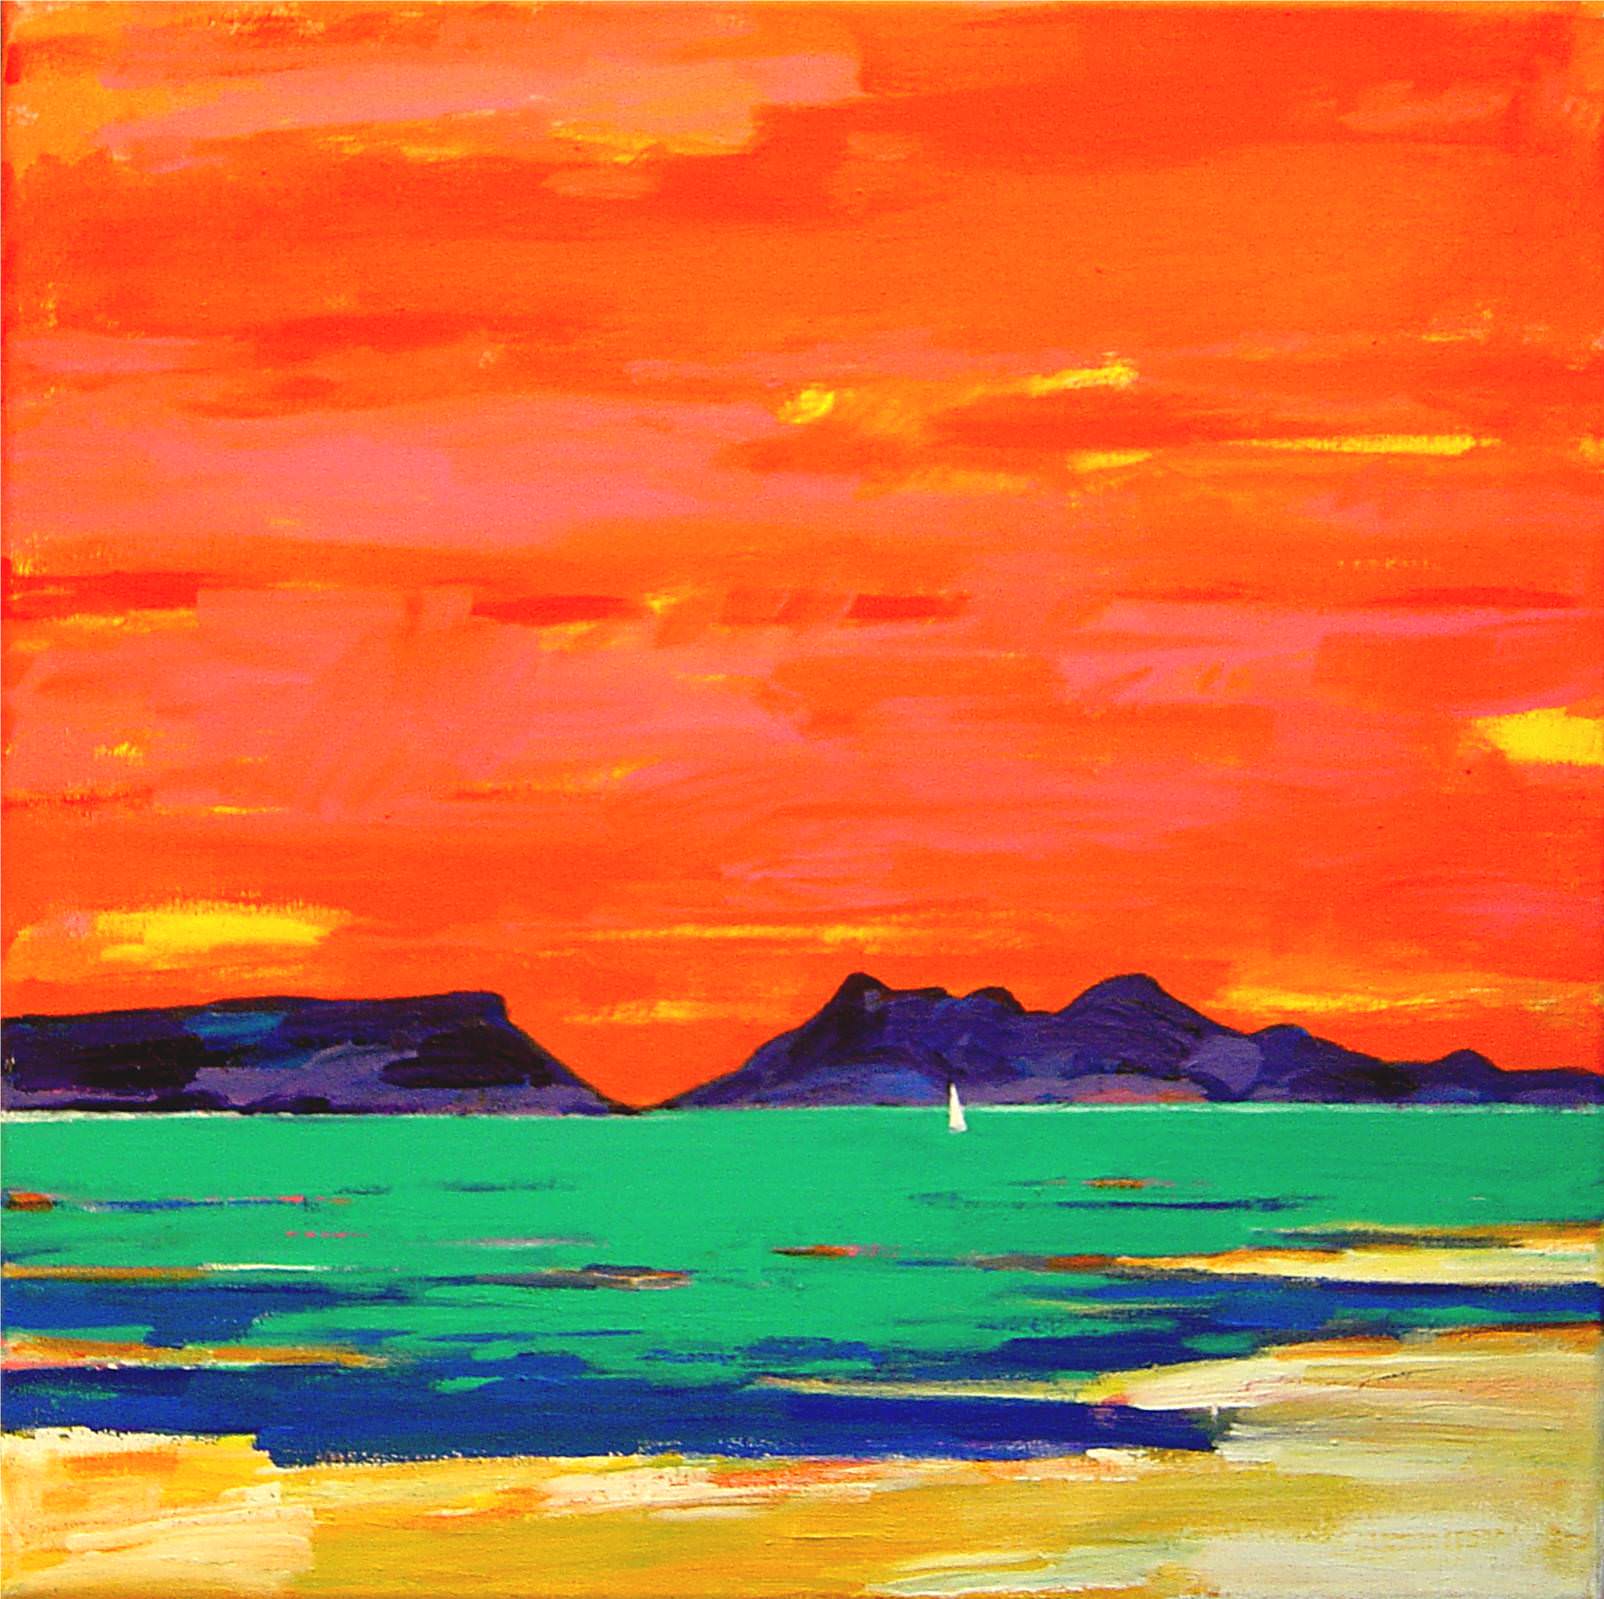 Print of Arisaig Sunset by John Nelson